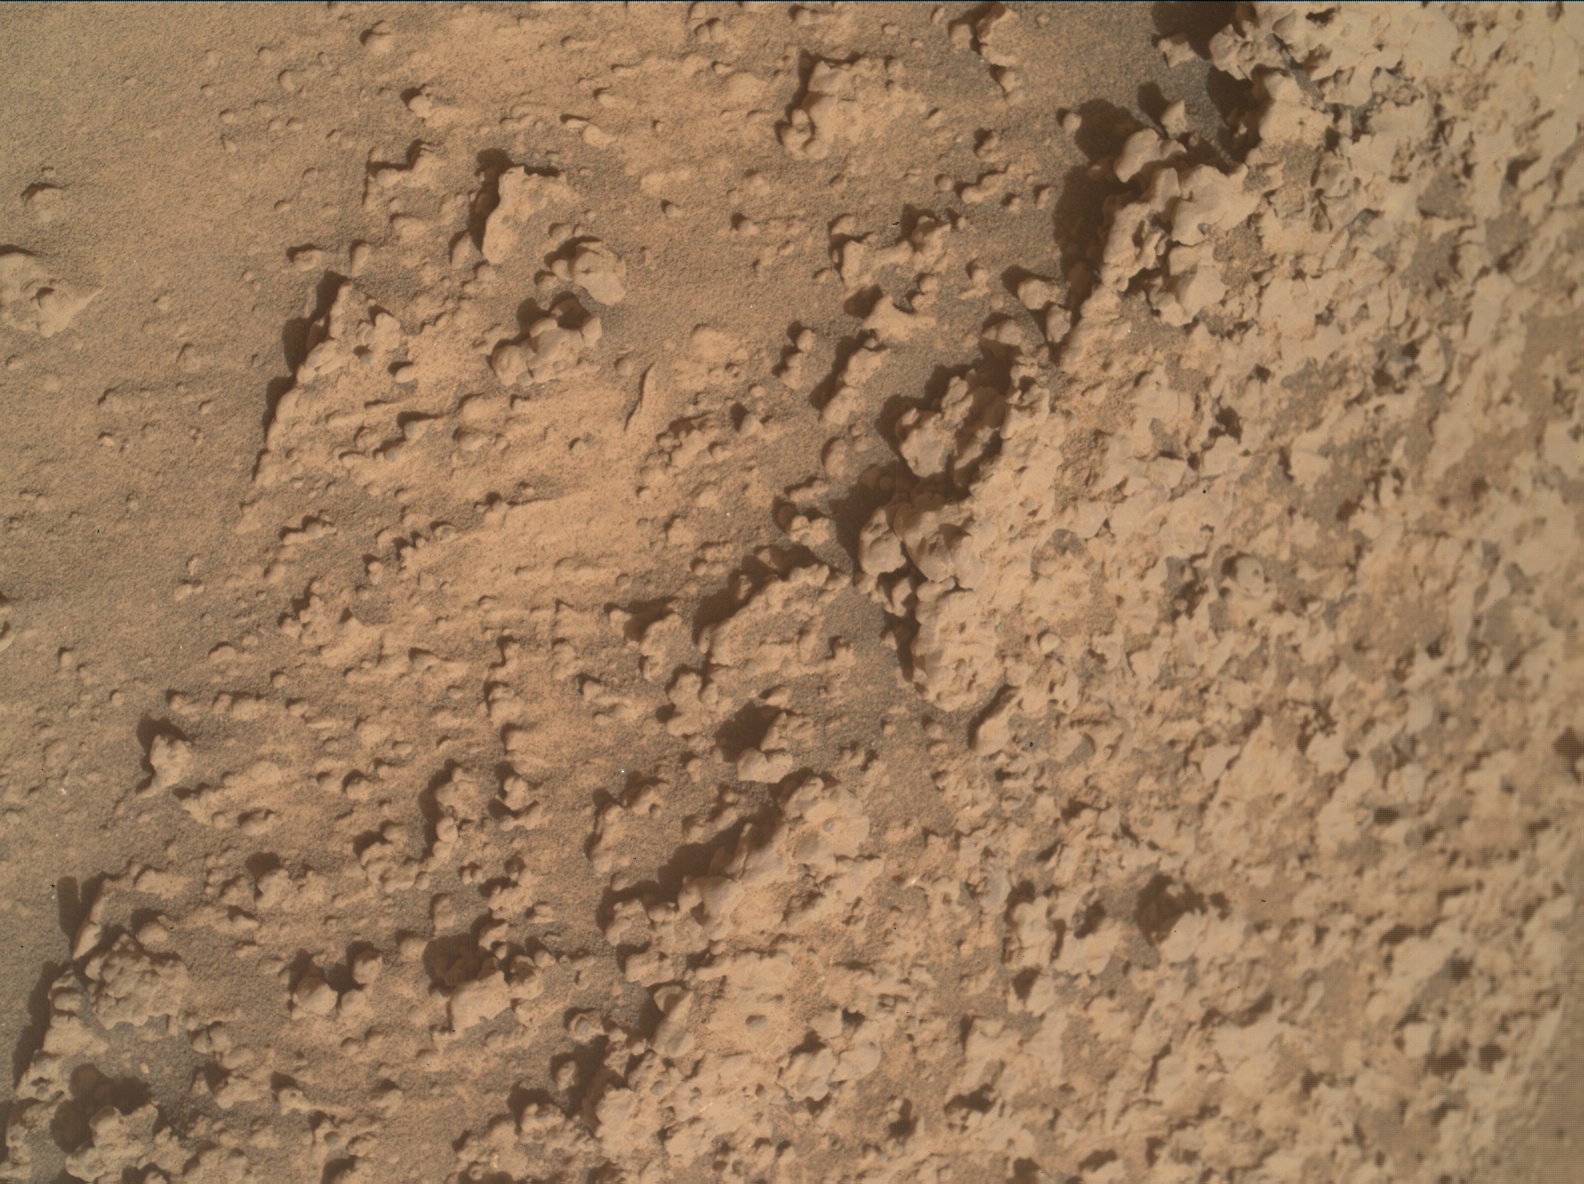 Nasa's Mars rover Curiosity acquired this image using its Mars Hand Lens Imager (MAHLI) on Sol 3551